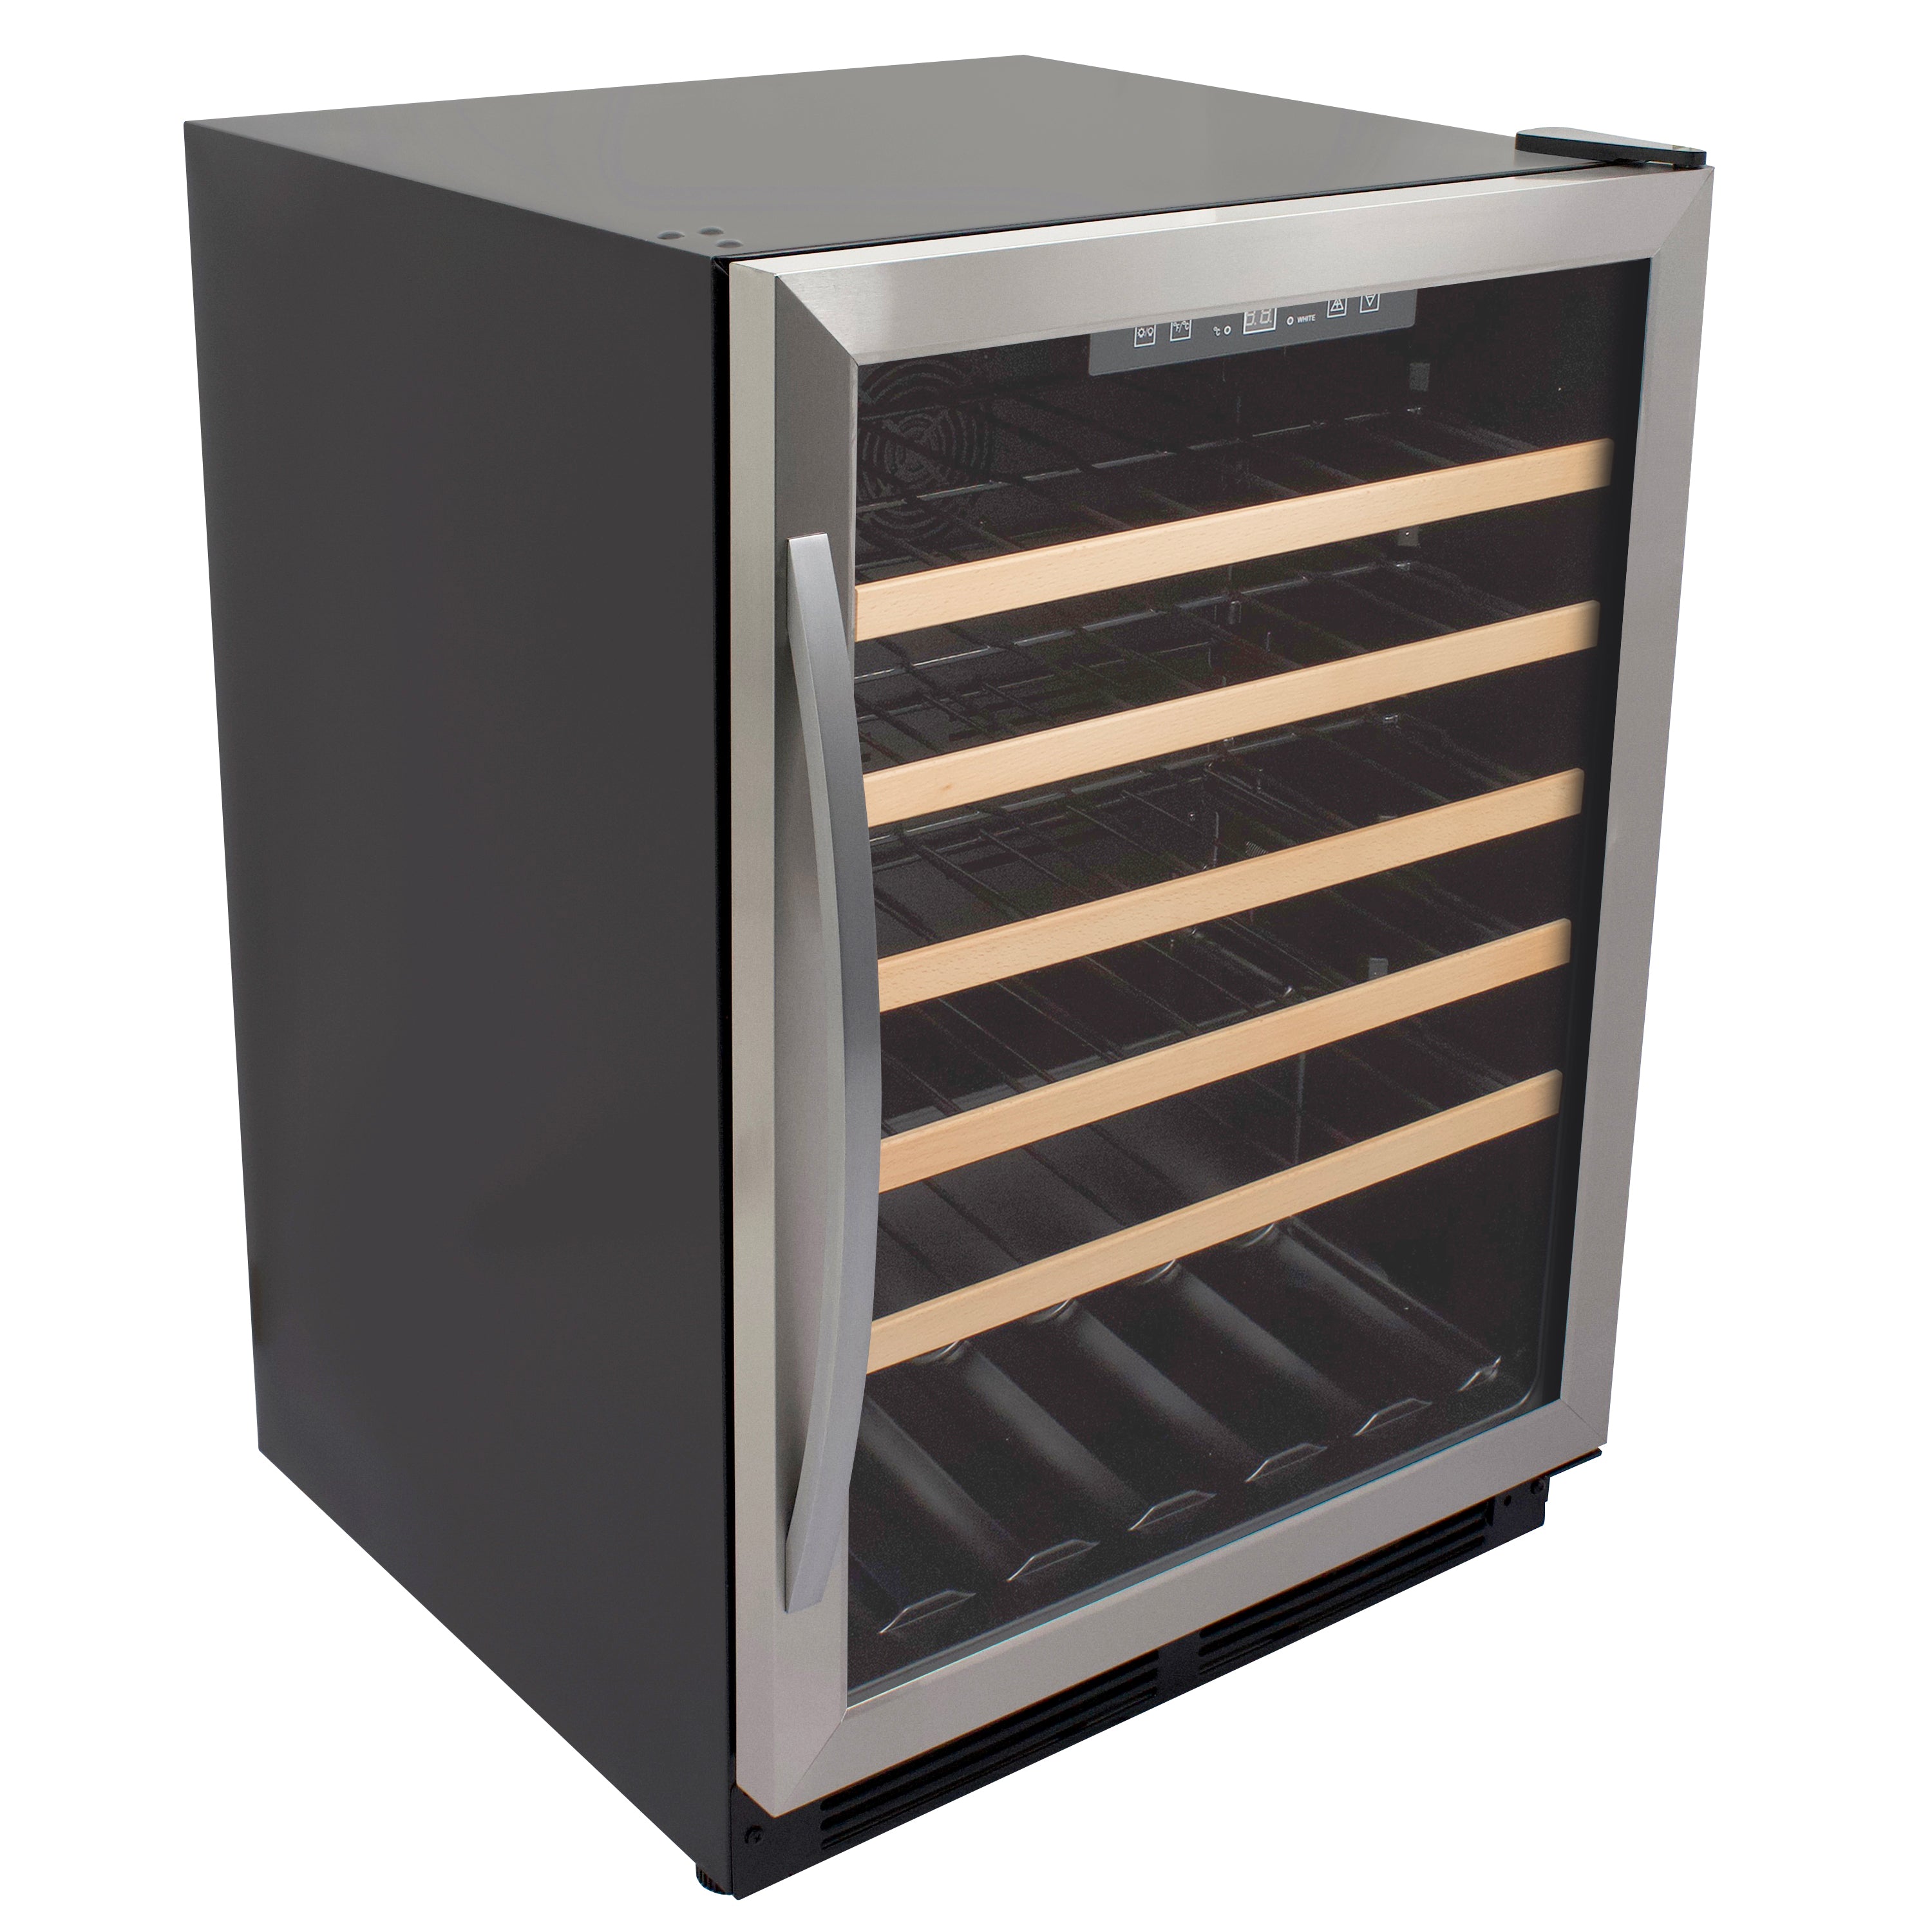 Avanti - WCB52T3S, Avanti Wine Cooler with Wood Accent Shelving, 51 Bottle Capacity, in Stainless Steel